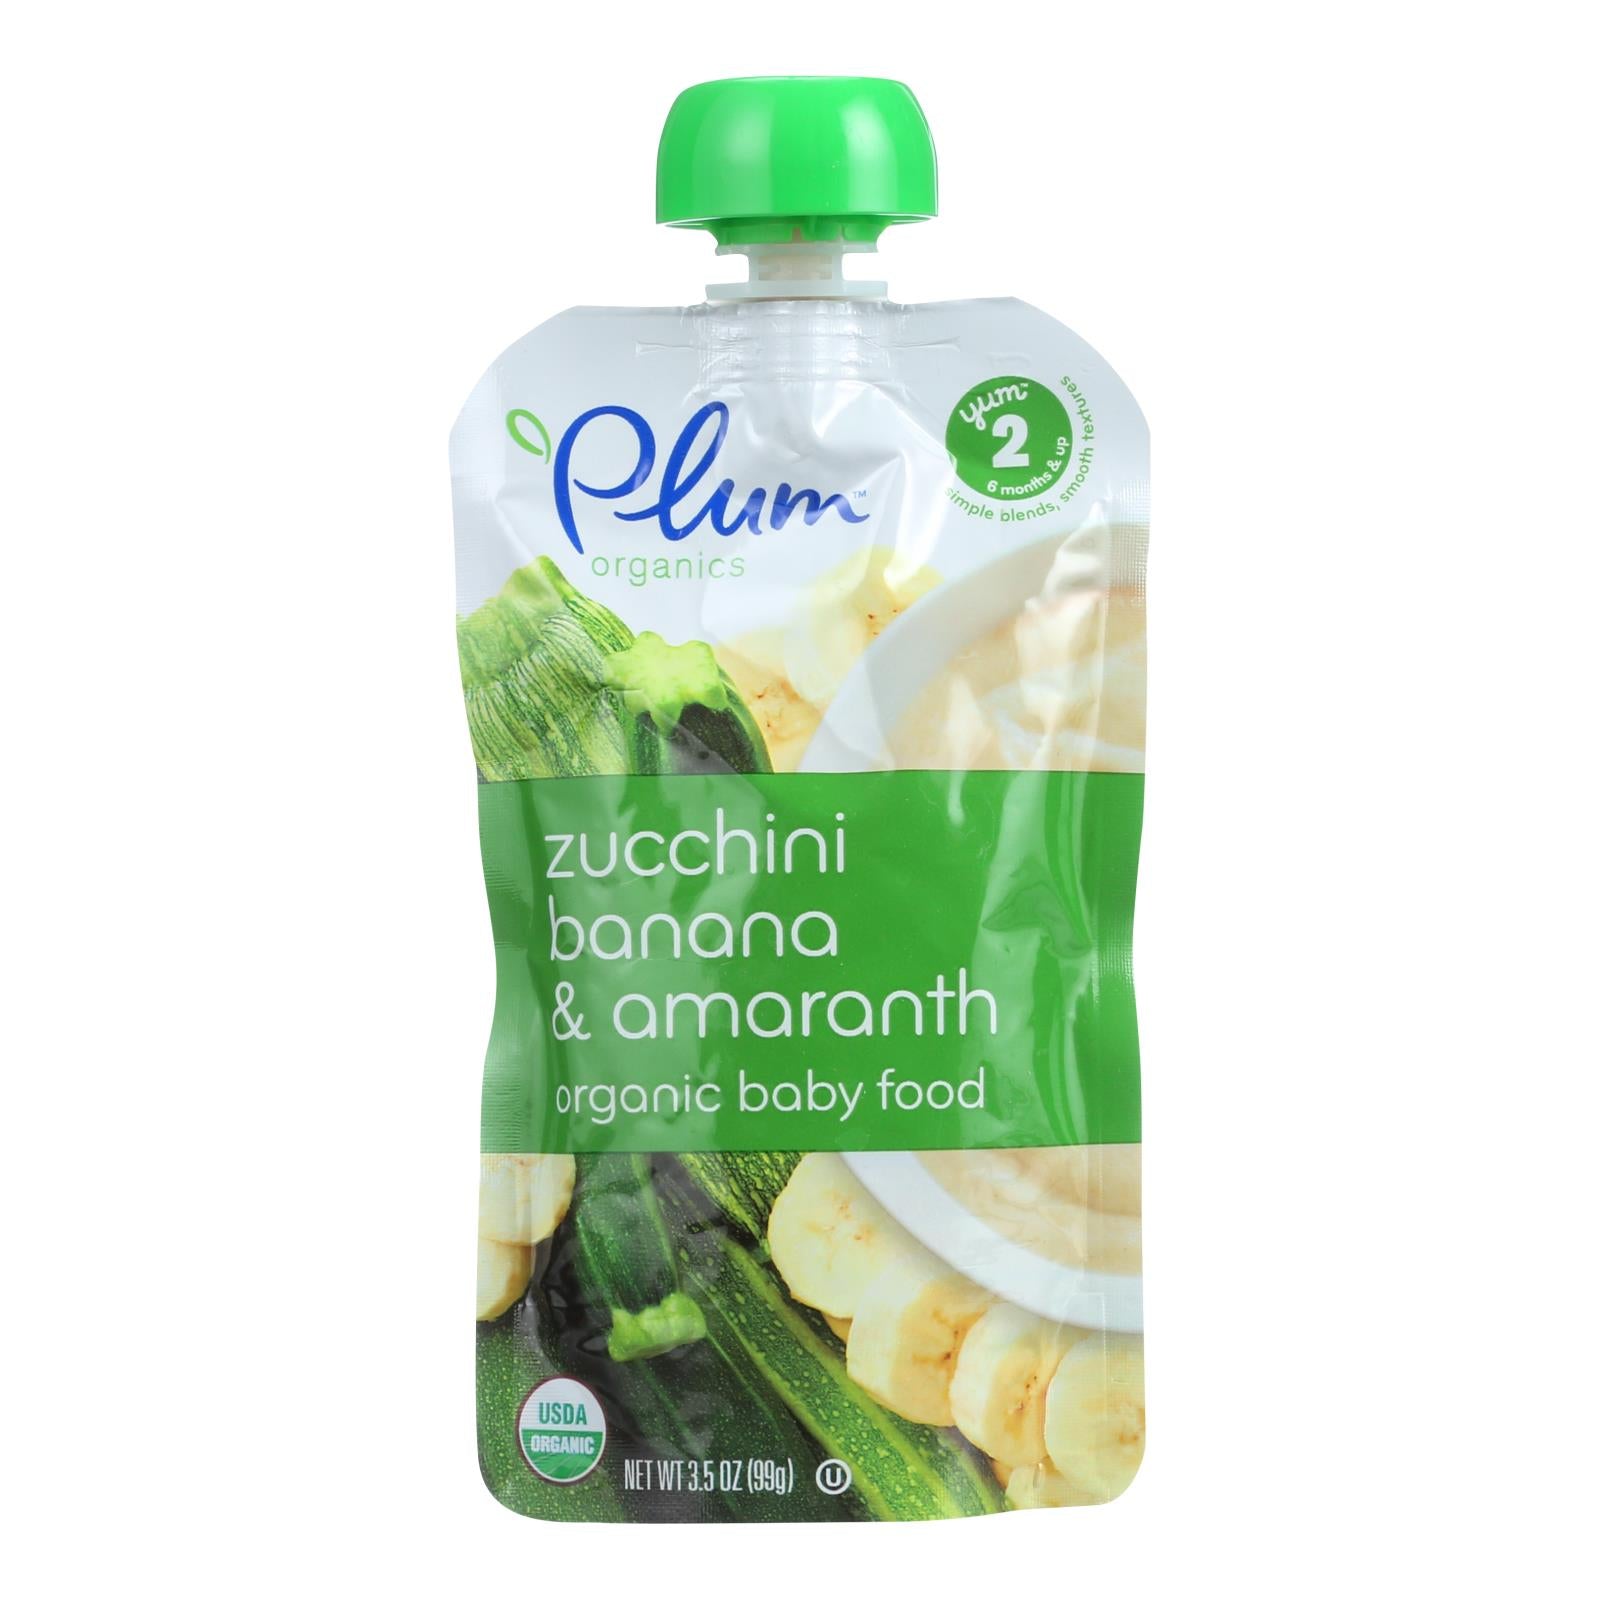 Plum Organics Baby Food - Organic - Zucchini Banana And Amaranth - Stage 2 - 6 Months And Up - 3.5 Oz - Case Of 6 - Whole Green Foods